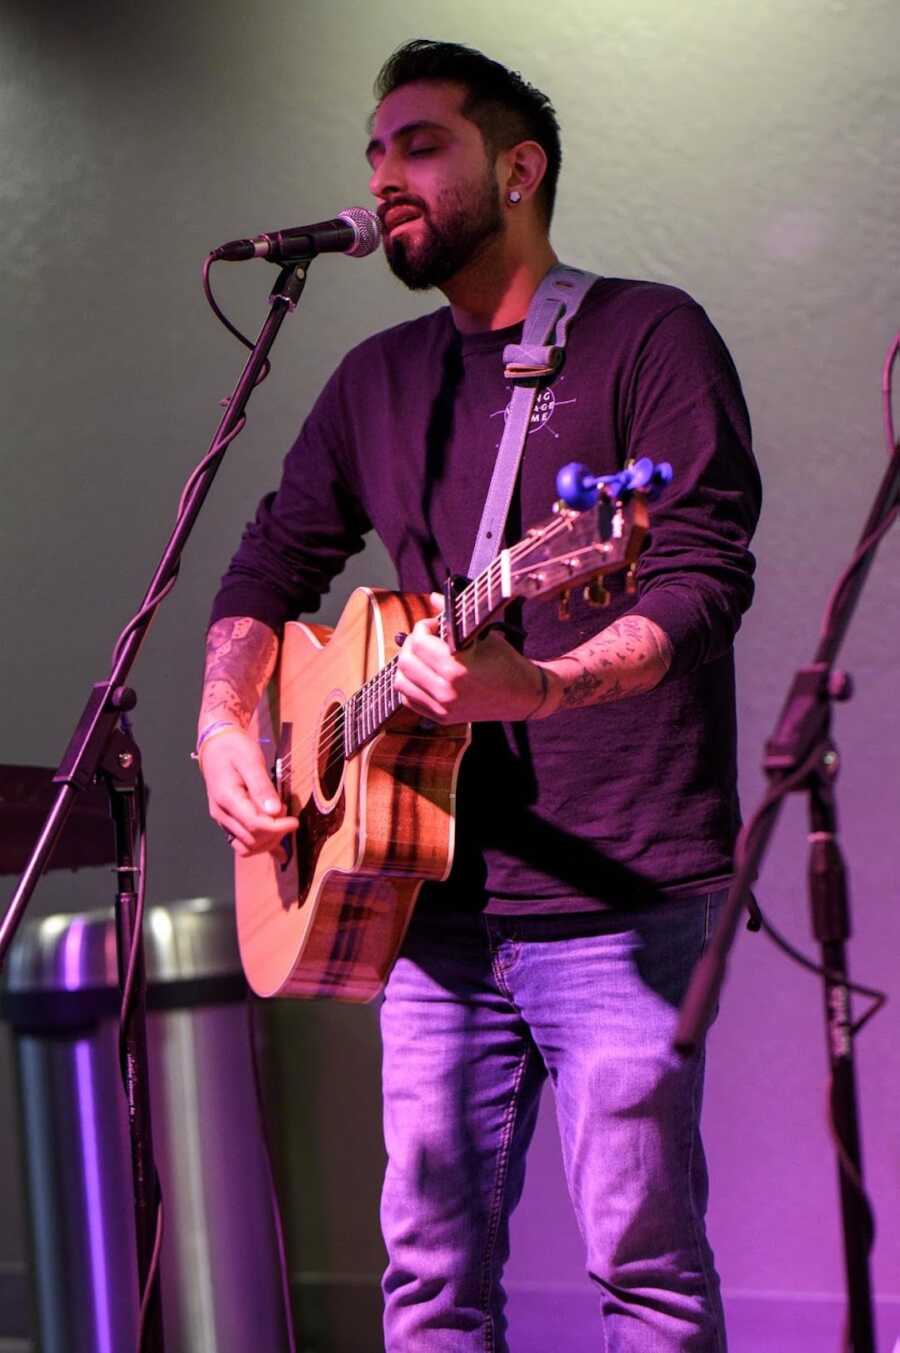 Man playing acoustic guitar on stage and singing into microphone